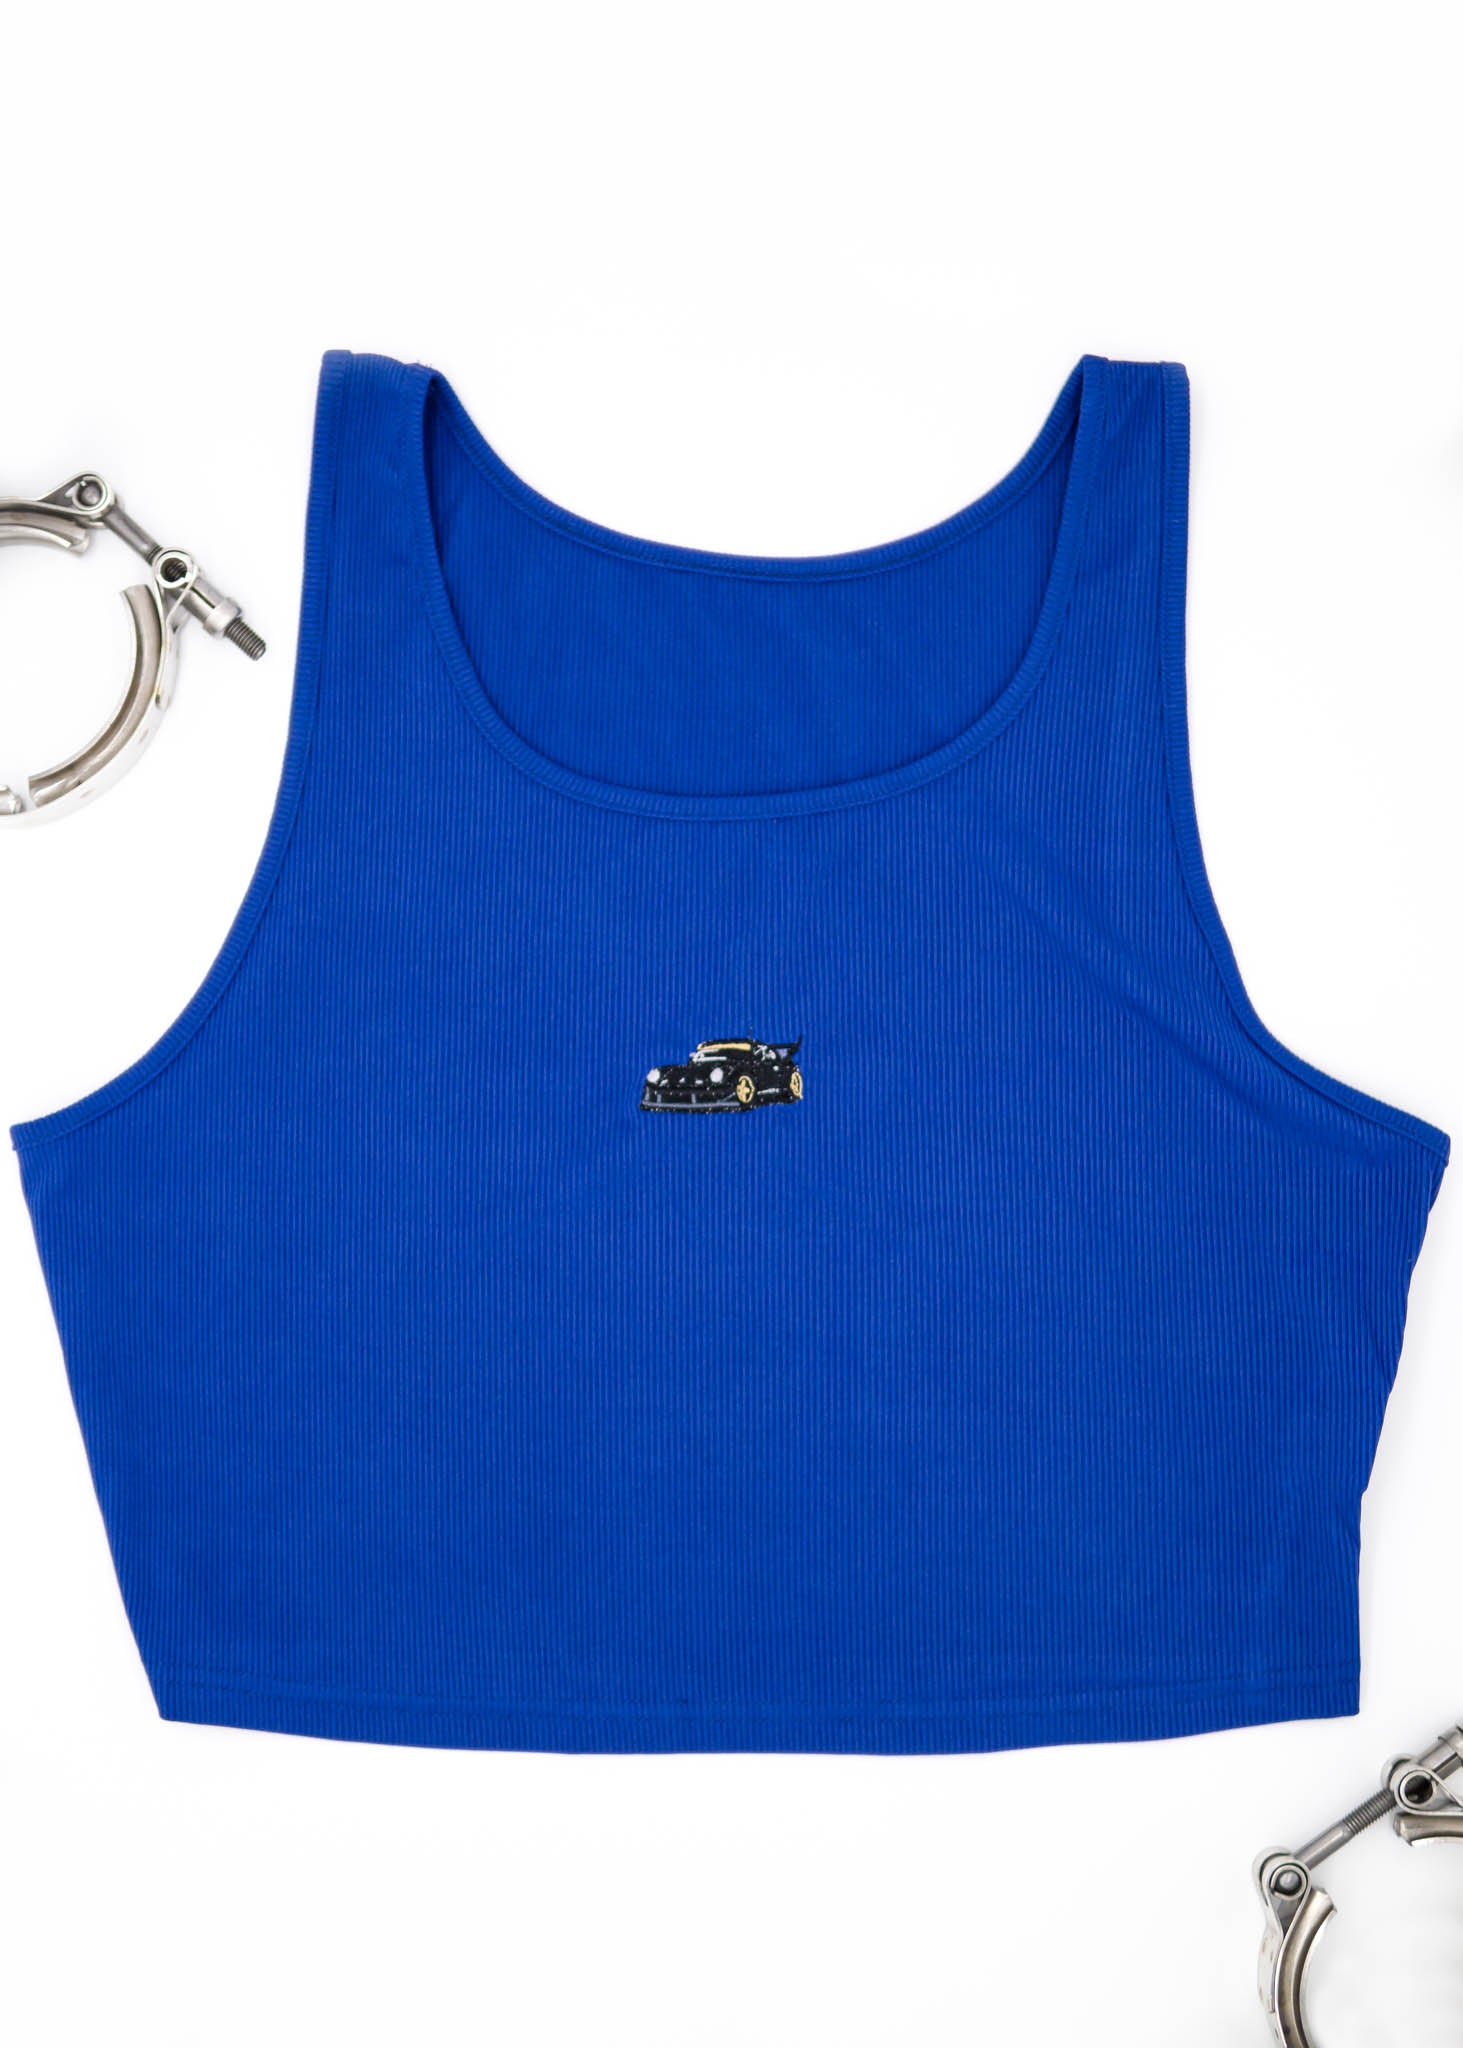 A blue RWB Porsche 930 911 Turbo crop top for plus size women. Photo is a front view of the shirt with Akira Nakai's RWB Porsche 930 911 Turbo Stella Artois. Fabric composition is a polyester, and elastine mix. The material is very stretchy, comfortable, and non-transparent. The style of this shirt is sleeveless, tank top straps, with crewneck neckline.